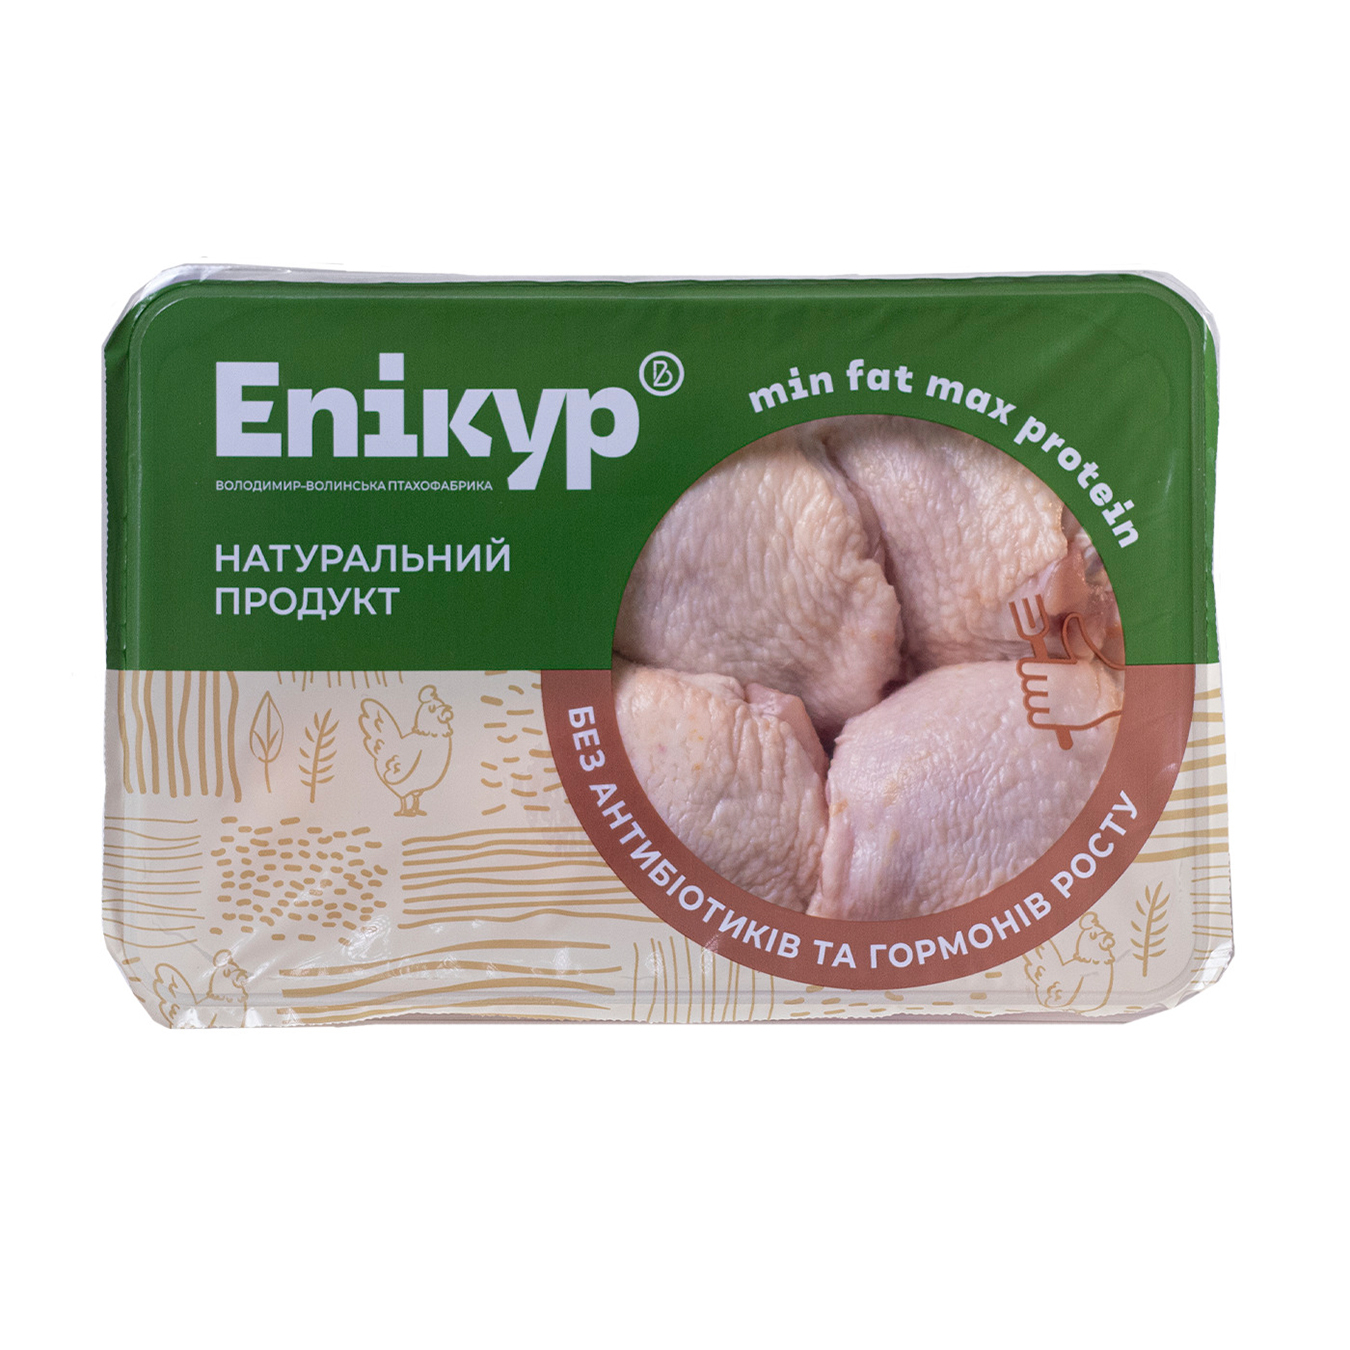 Epicure broiler chicken thigh chilled 800-900 grams per package